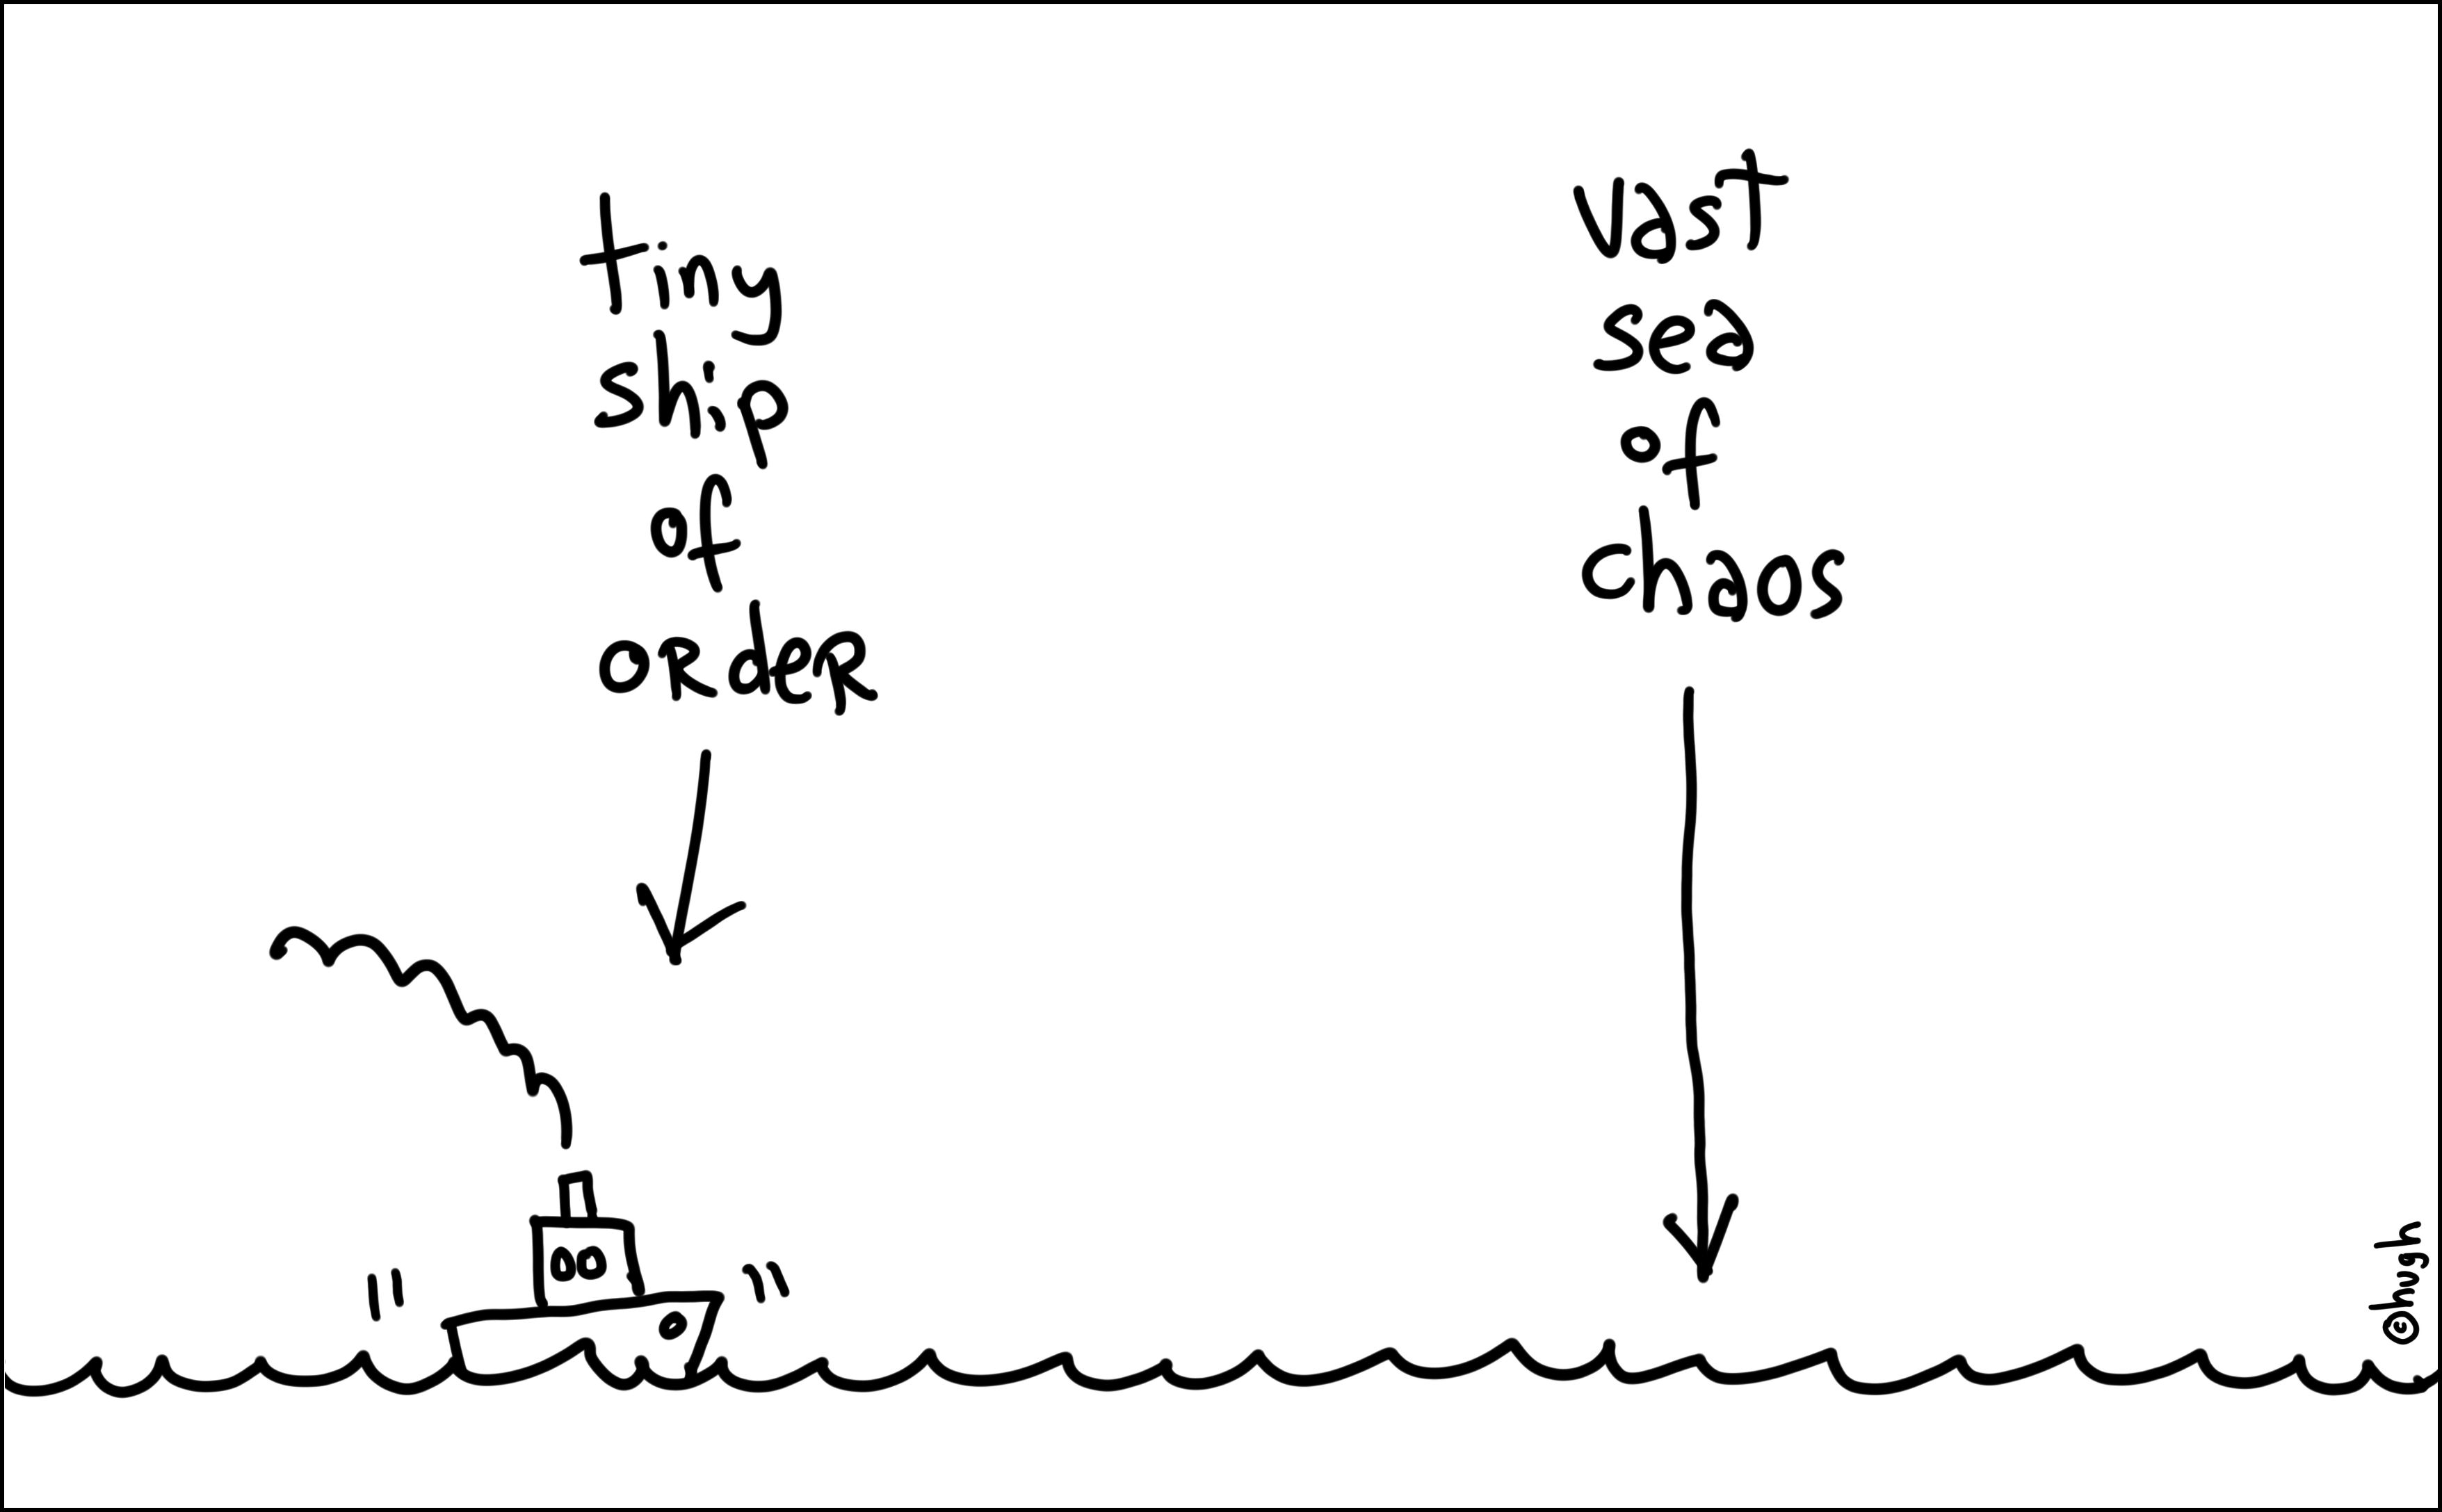 Tiny ship of order in a vast sea of chaos